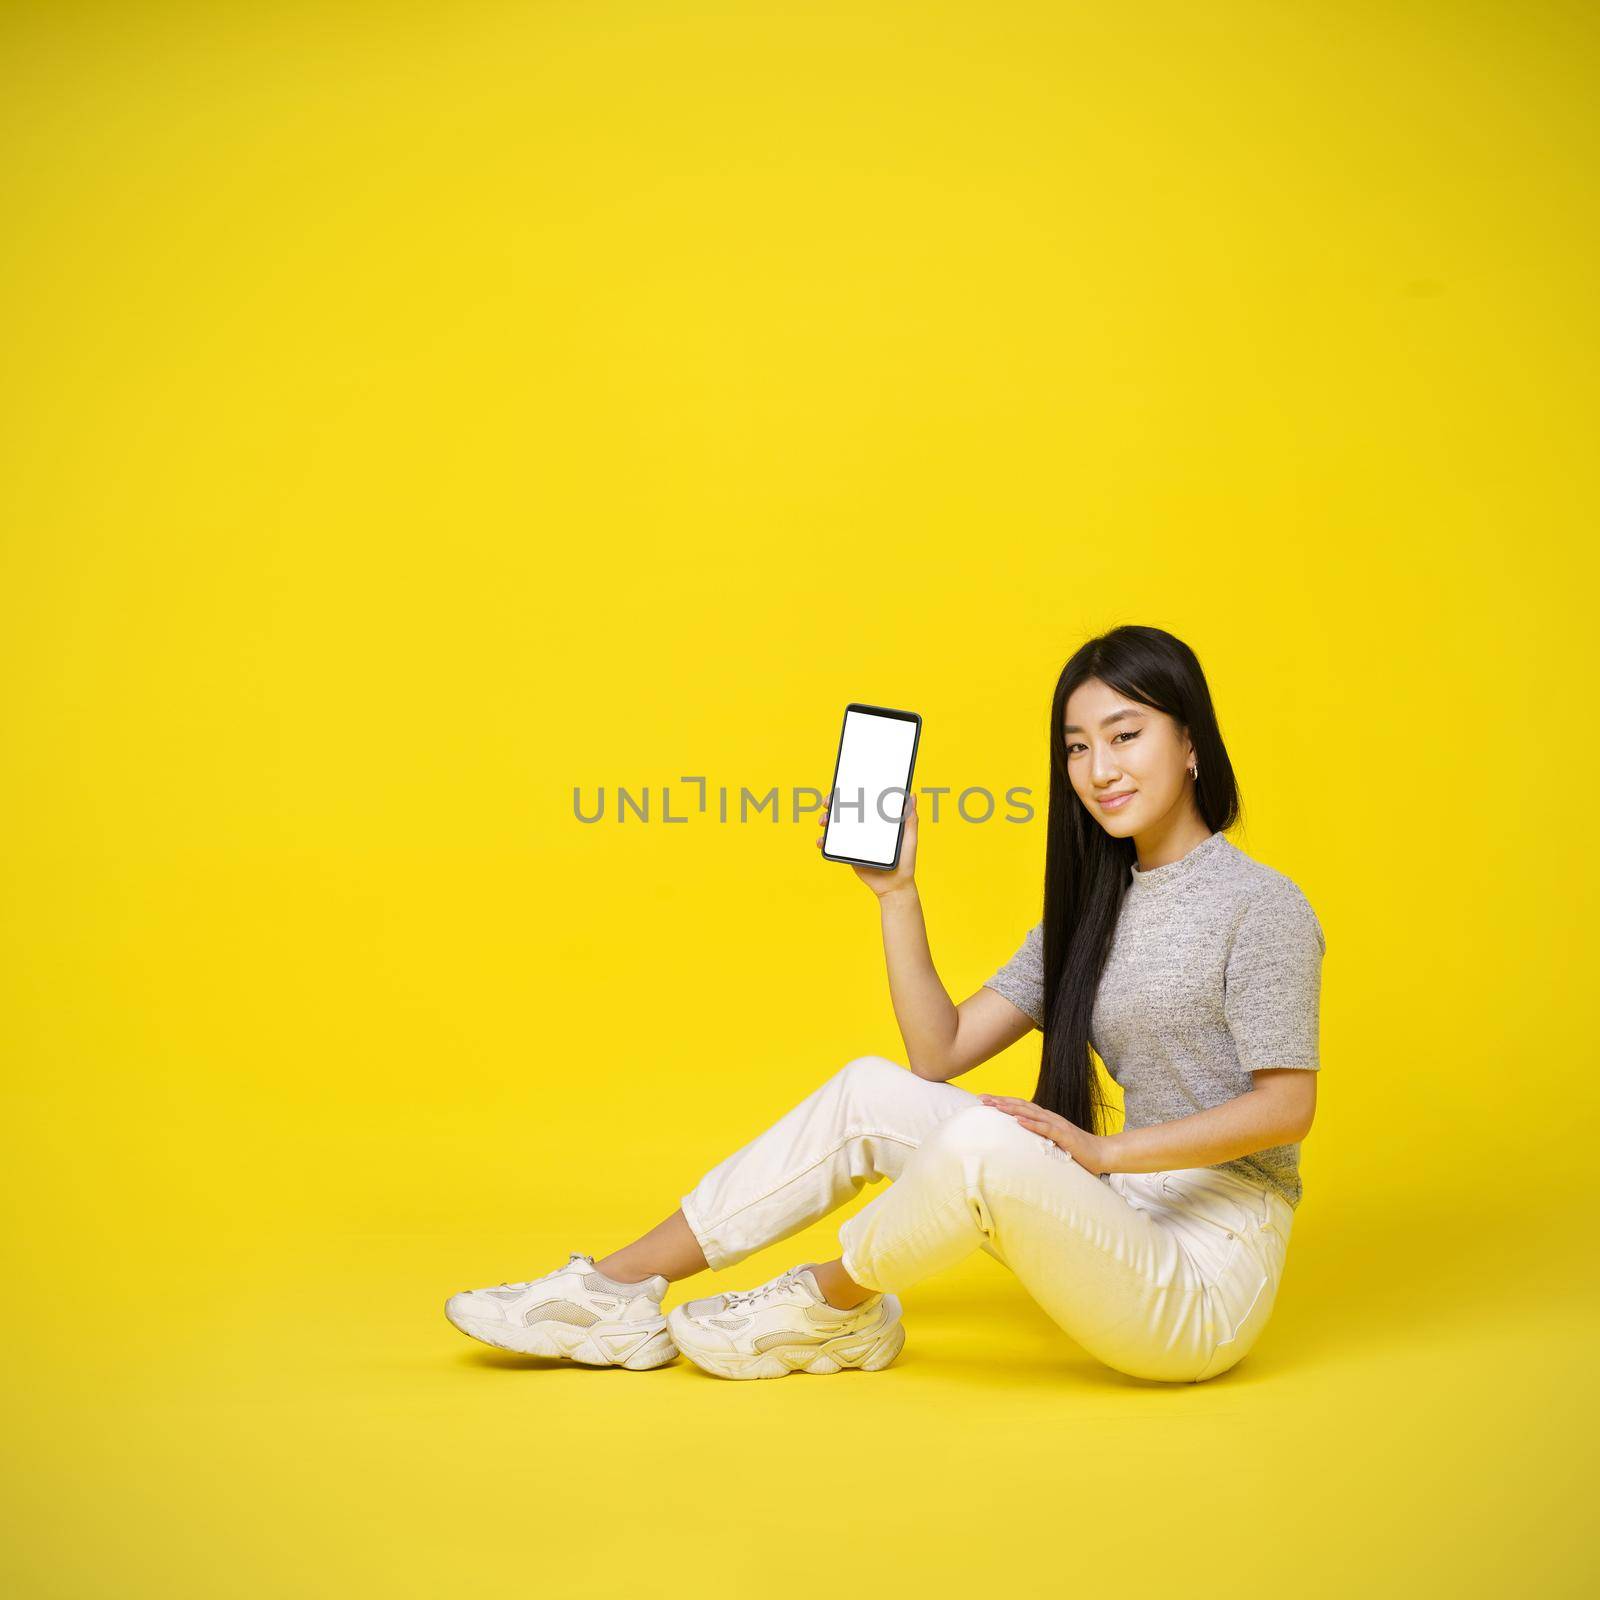 Charming asian young girl holding smartphone sitting on the floor showing a white screen isolated on yellow background. Great offer. Product placement. Mobile app advertisement. Copy space.